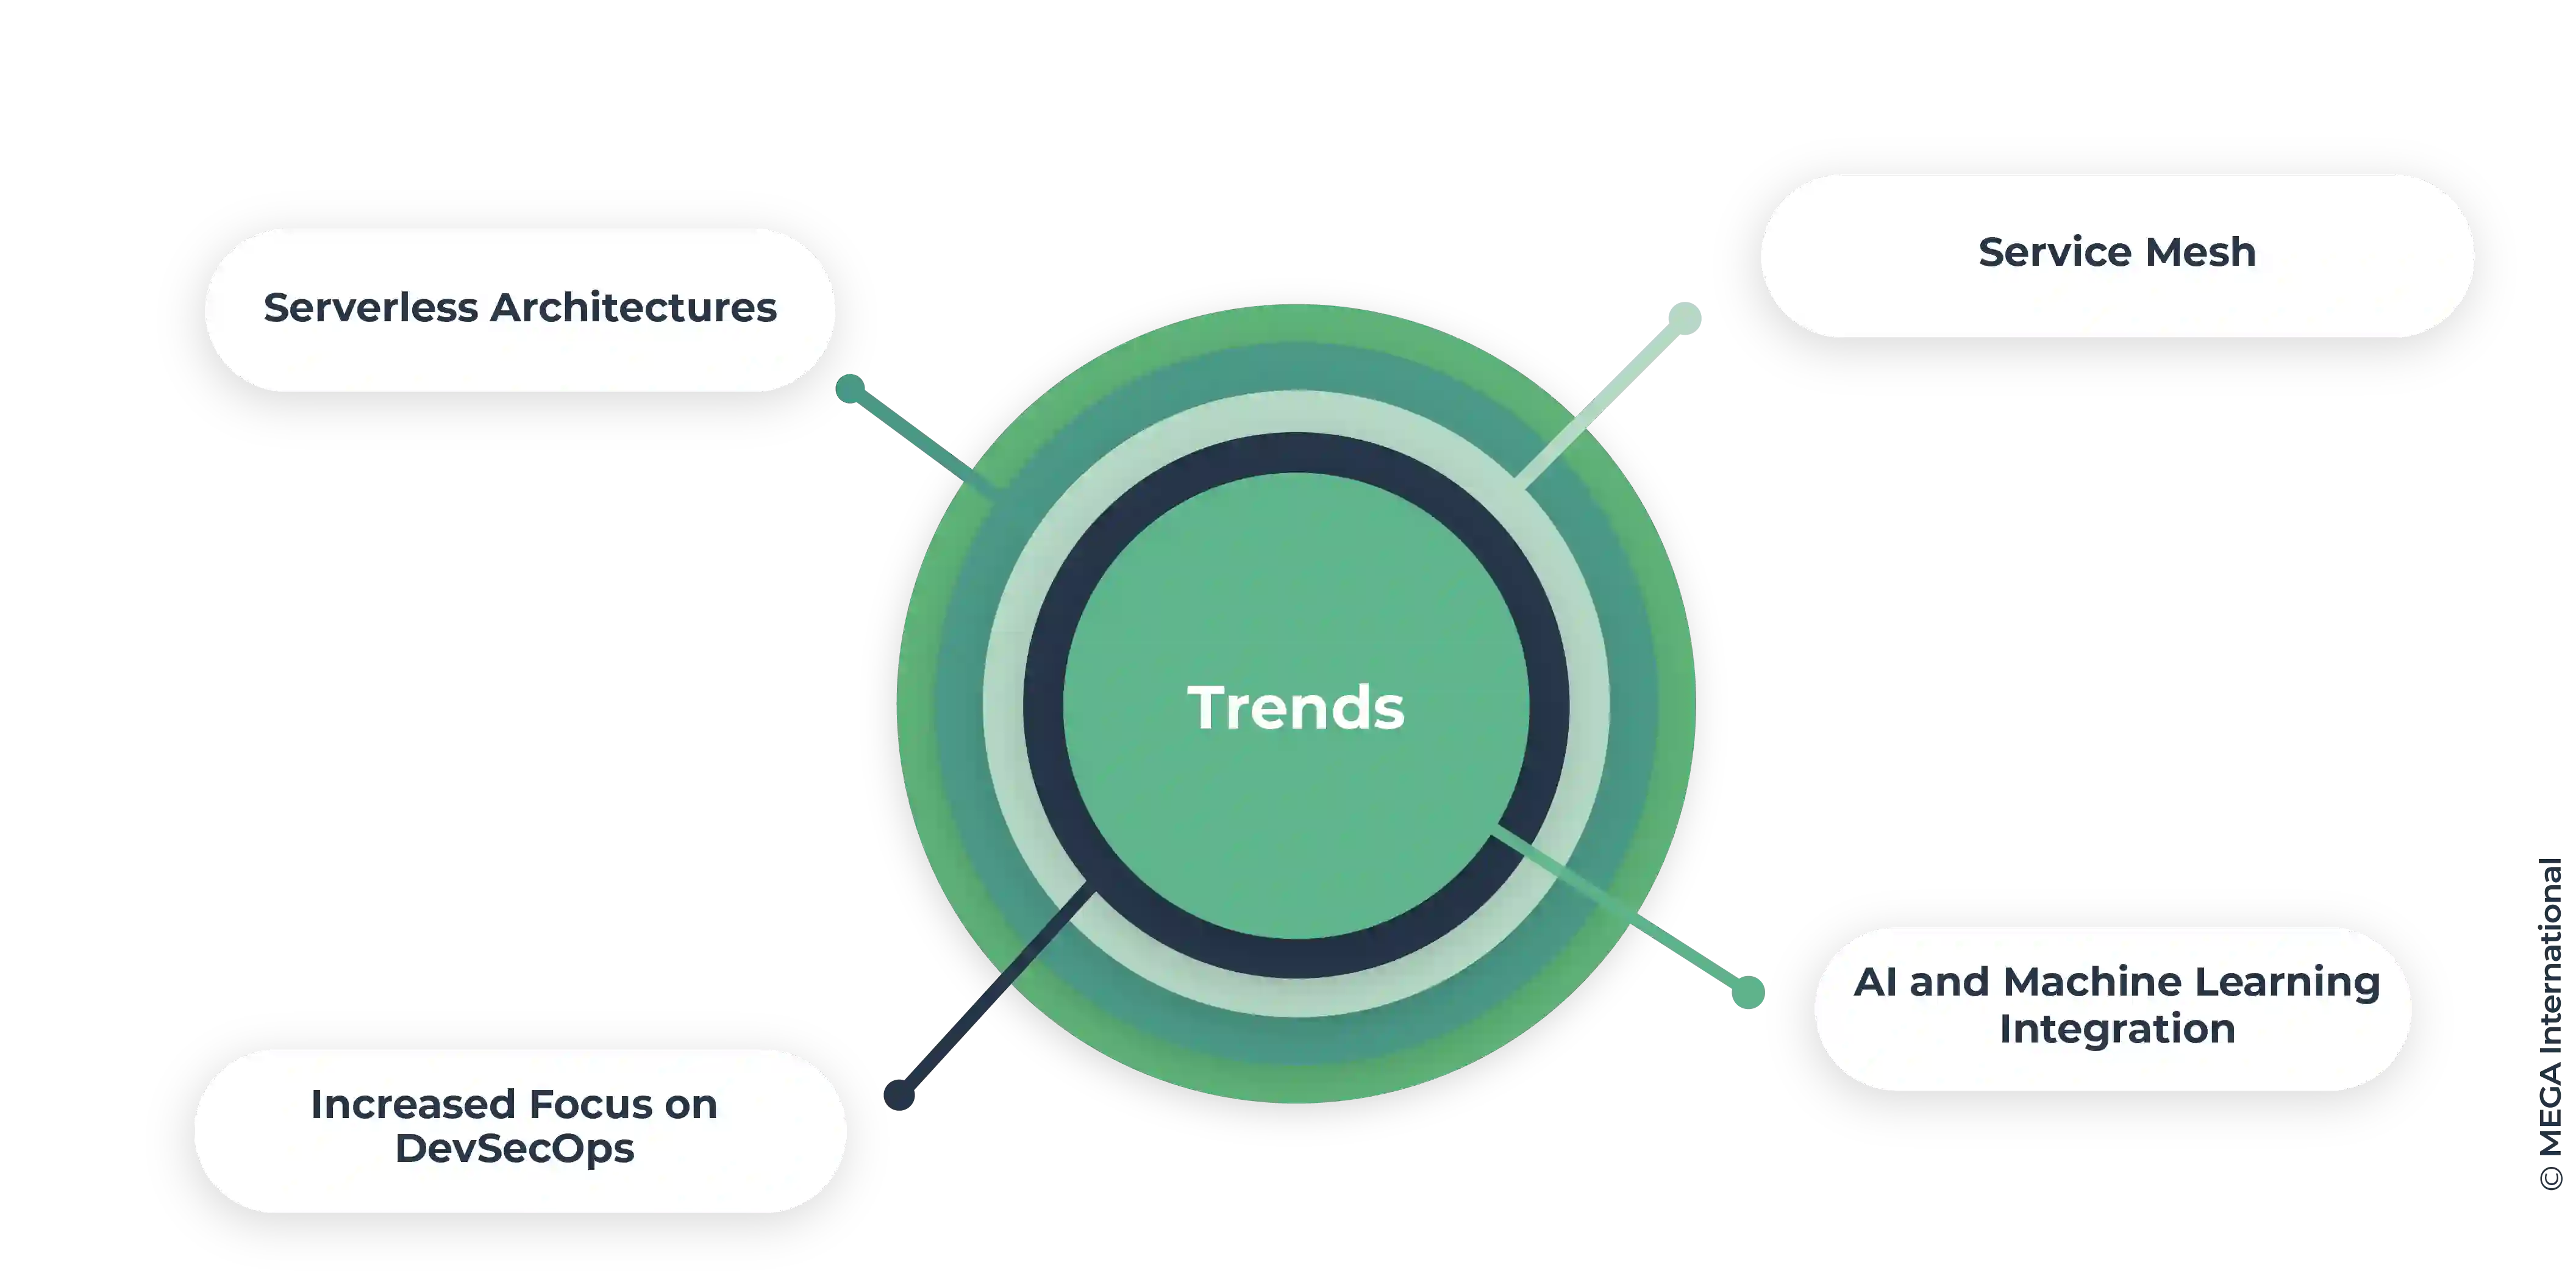 Microservices architecture trends